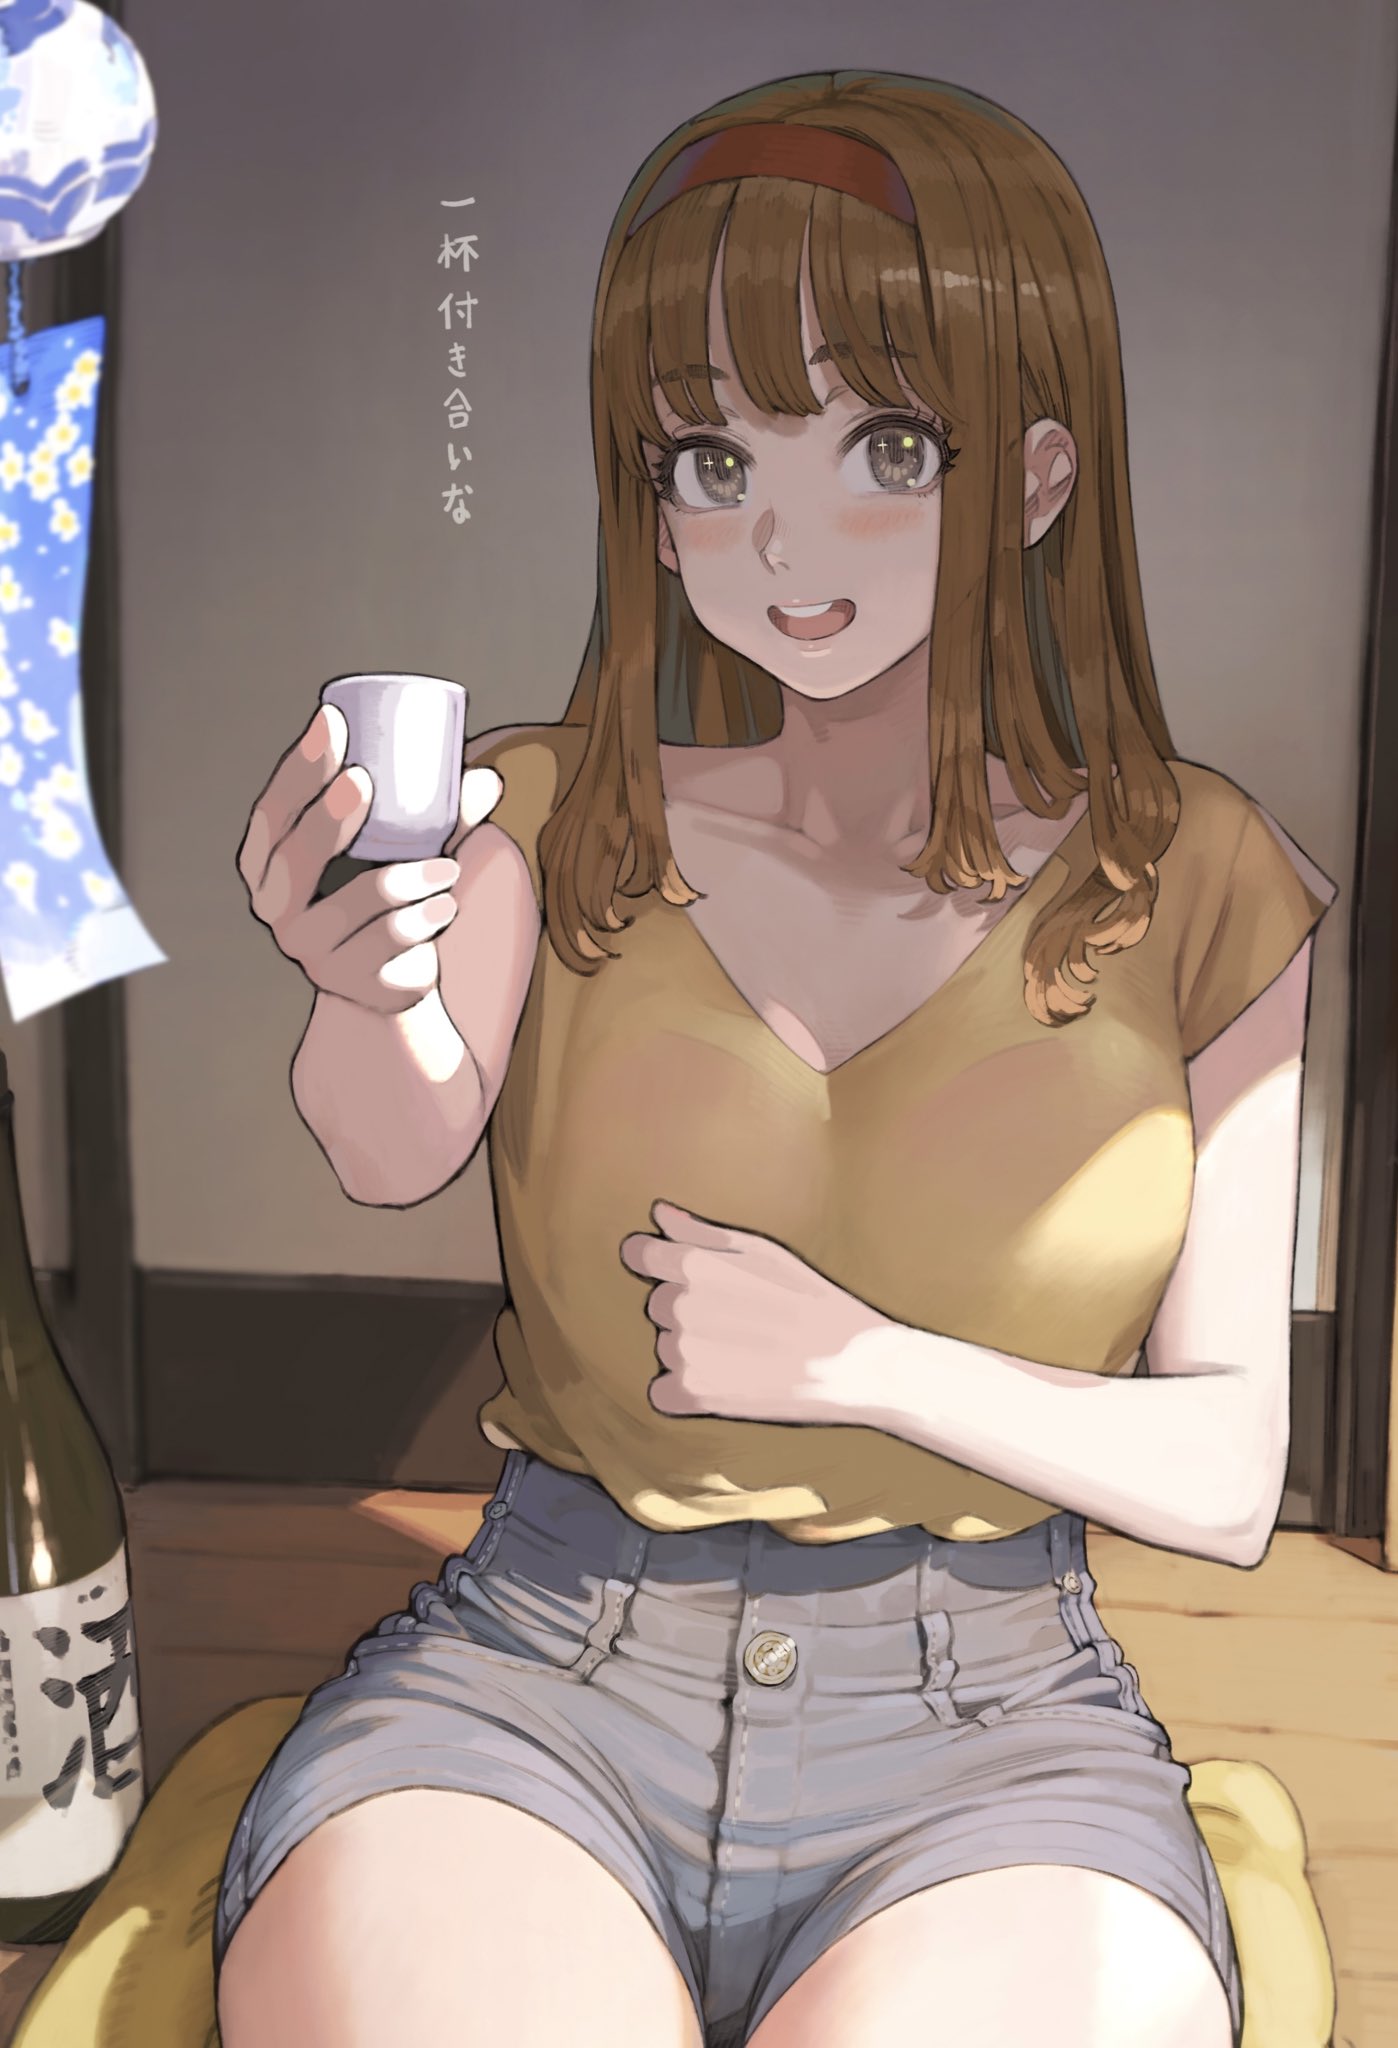 1girl alcohol bottle breasts brown_eyes brown_hair commentary_request cup eyebrows_visible_through_hair giving headband highres holding holding_cup incoming_drink jun_(seojh1029) long_hair looking_at_viewer open_mouth original outstretched_arm red_headband sake sake_bottle shirt shorts sitting sitting_on_pillow sleeveless sleeveless_shirt smile solo translation_request wind_chime yellow_shirt